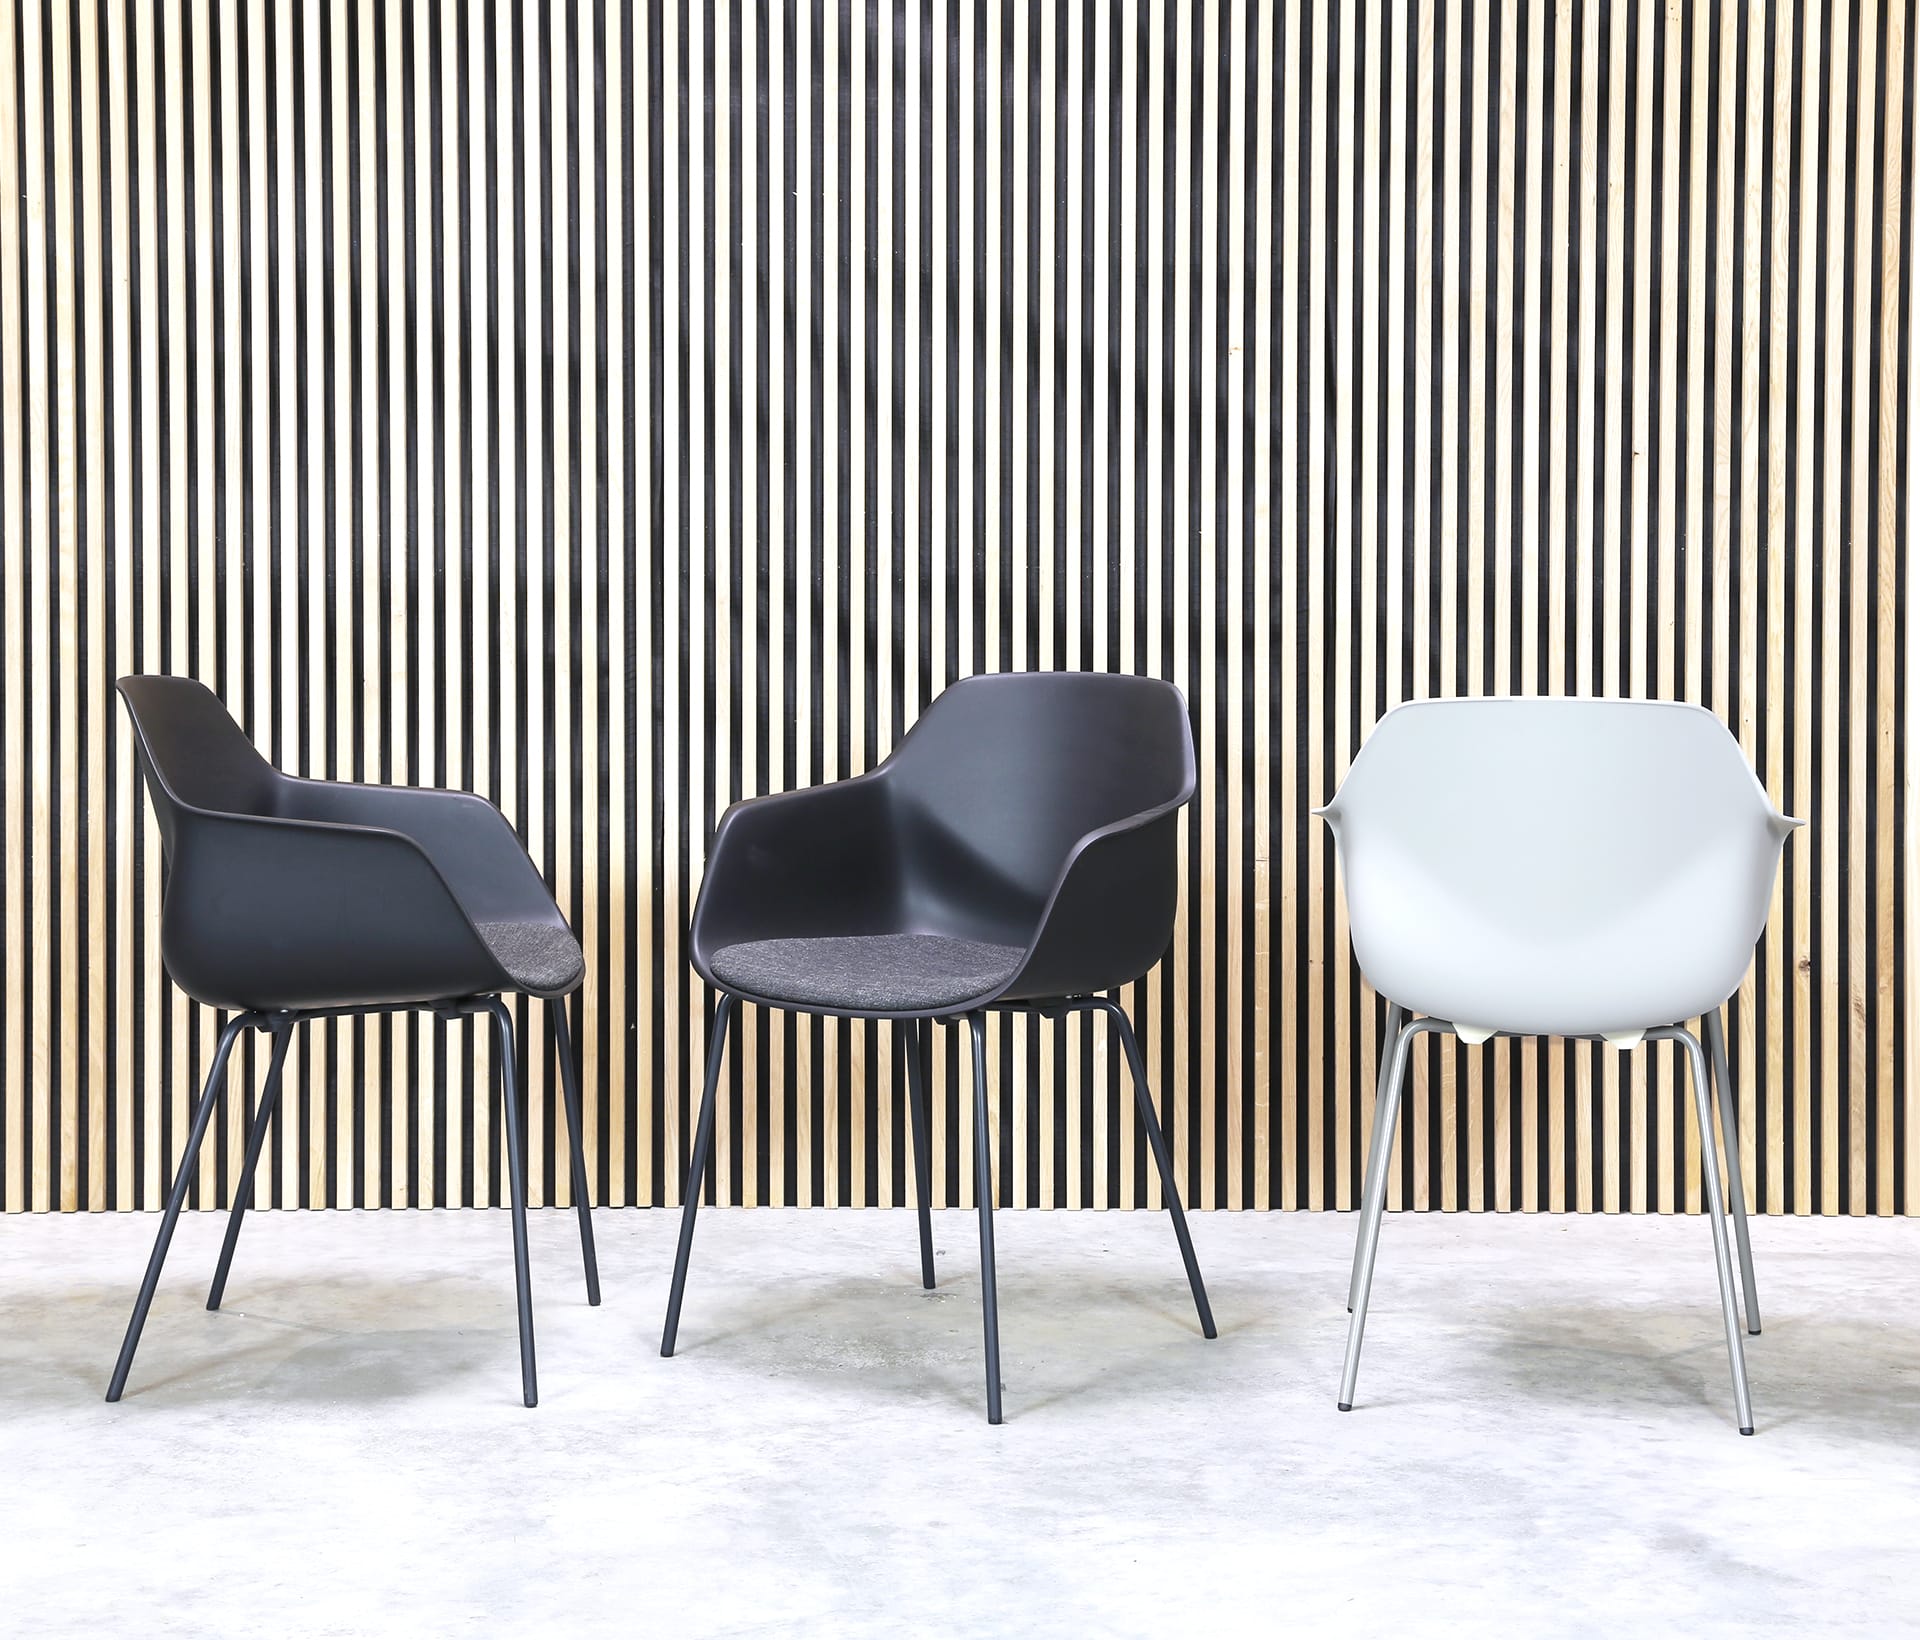 Three black and white chairs in front of a wooden wall.